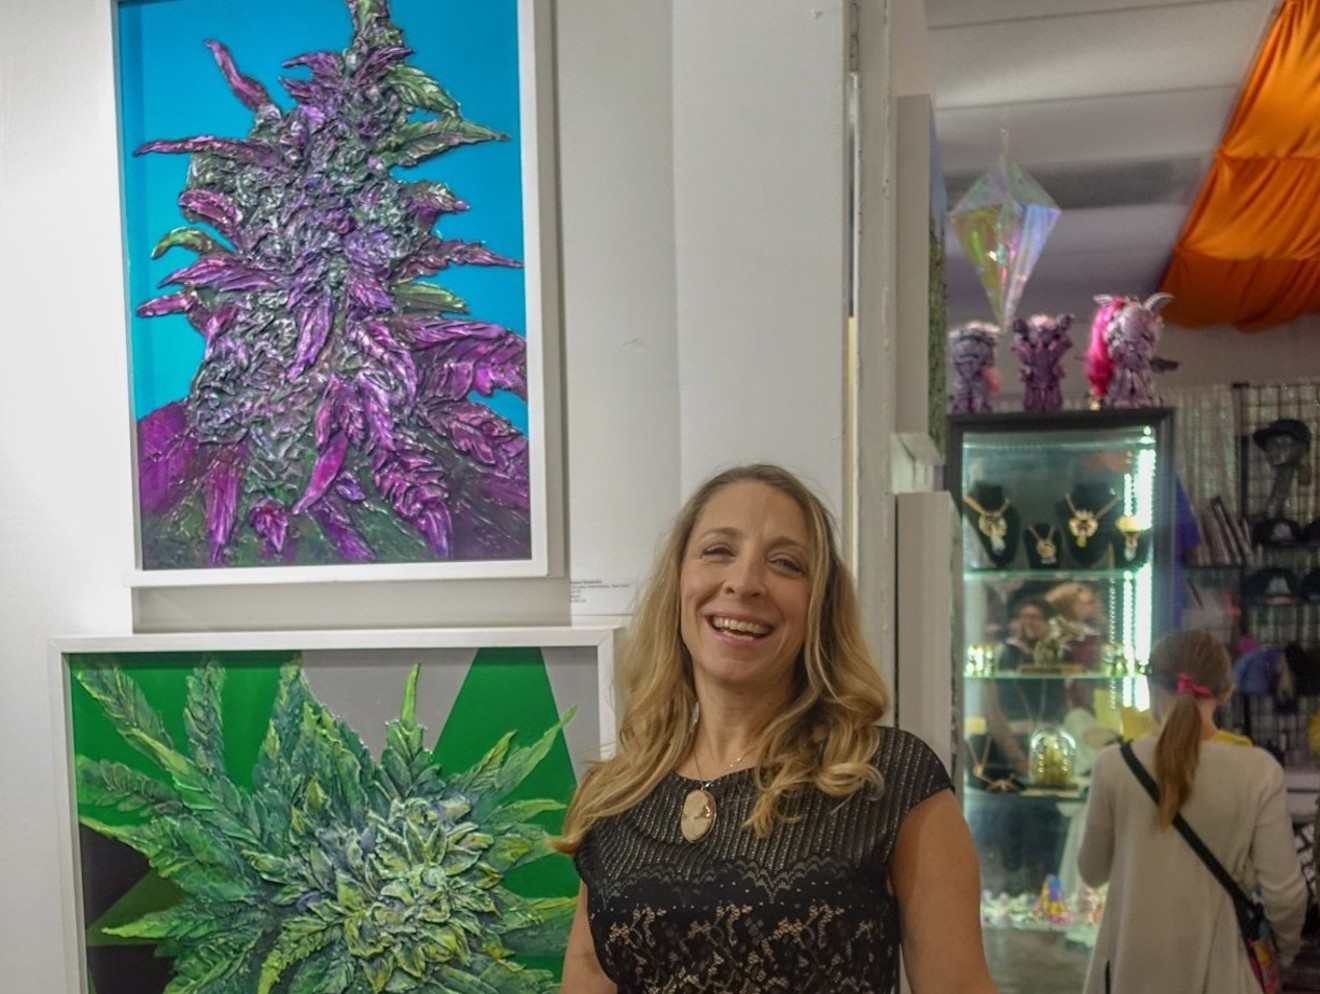 Alyssa Serpentini has shown her cannabis art in Denver and is taking her talents to Miami soon.